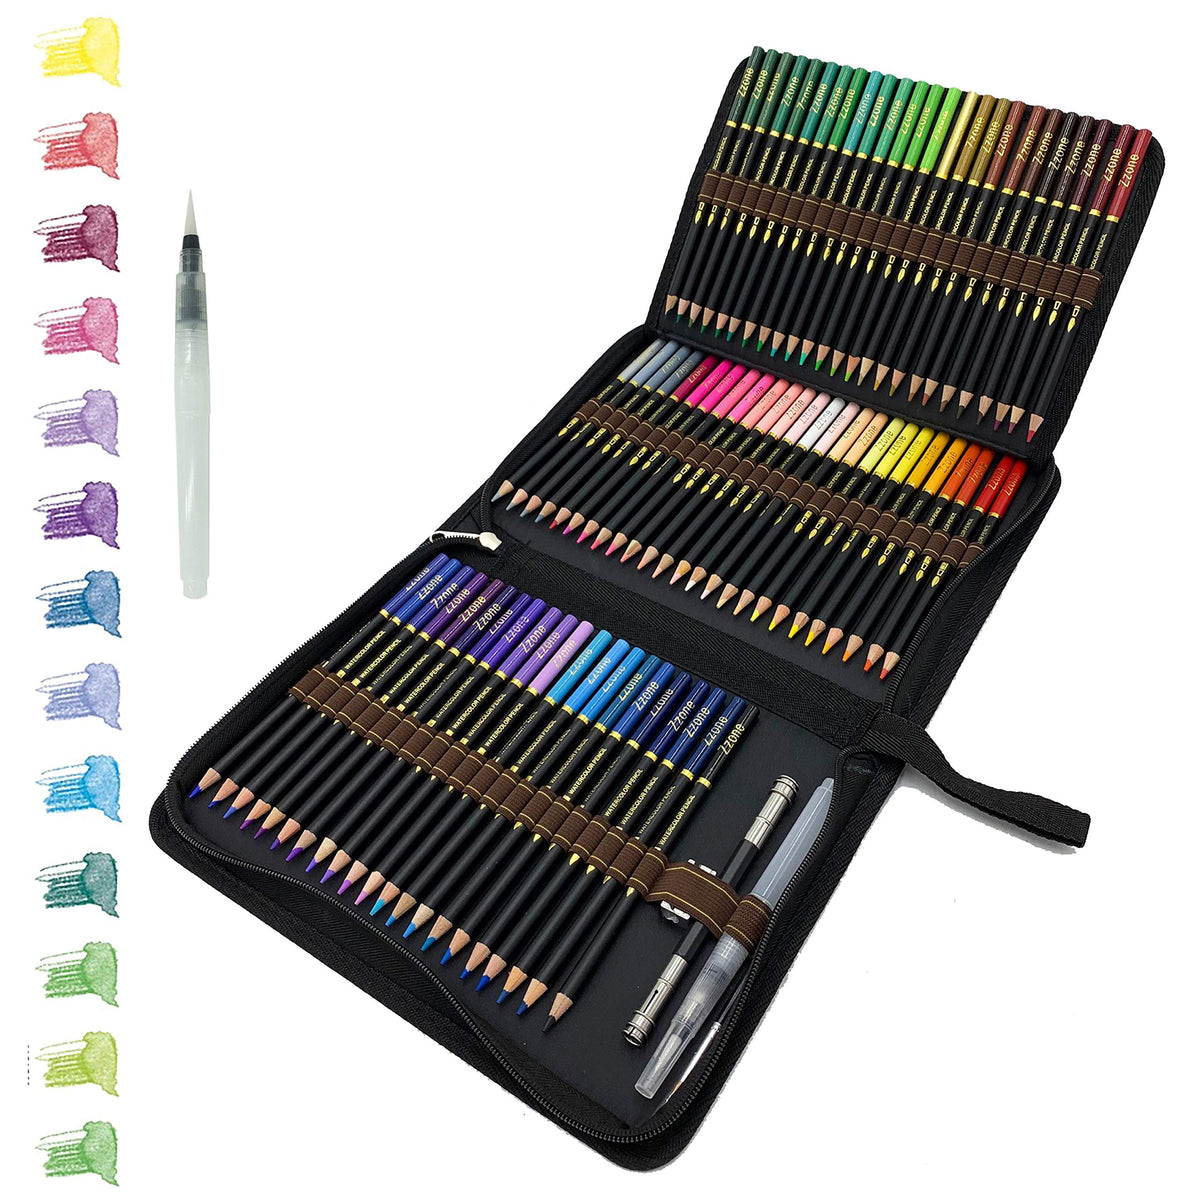 Zzone Colour Sketch Pencils Set Shuttle Art Sketching And Drawing Pencil Set